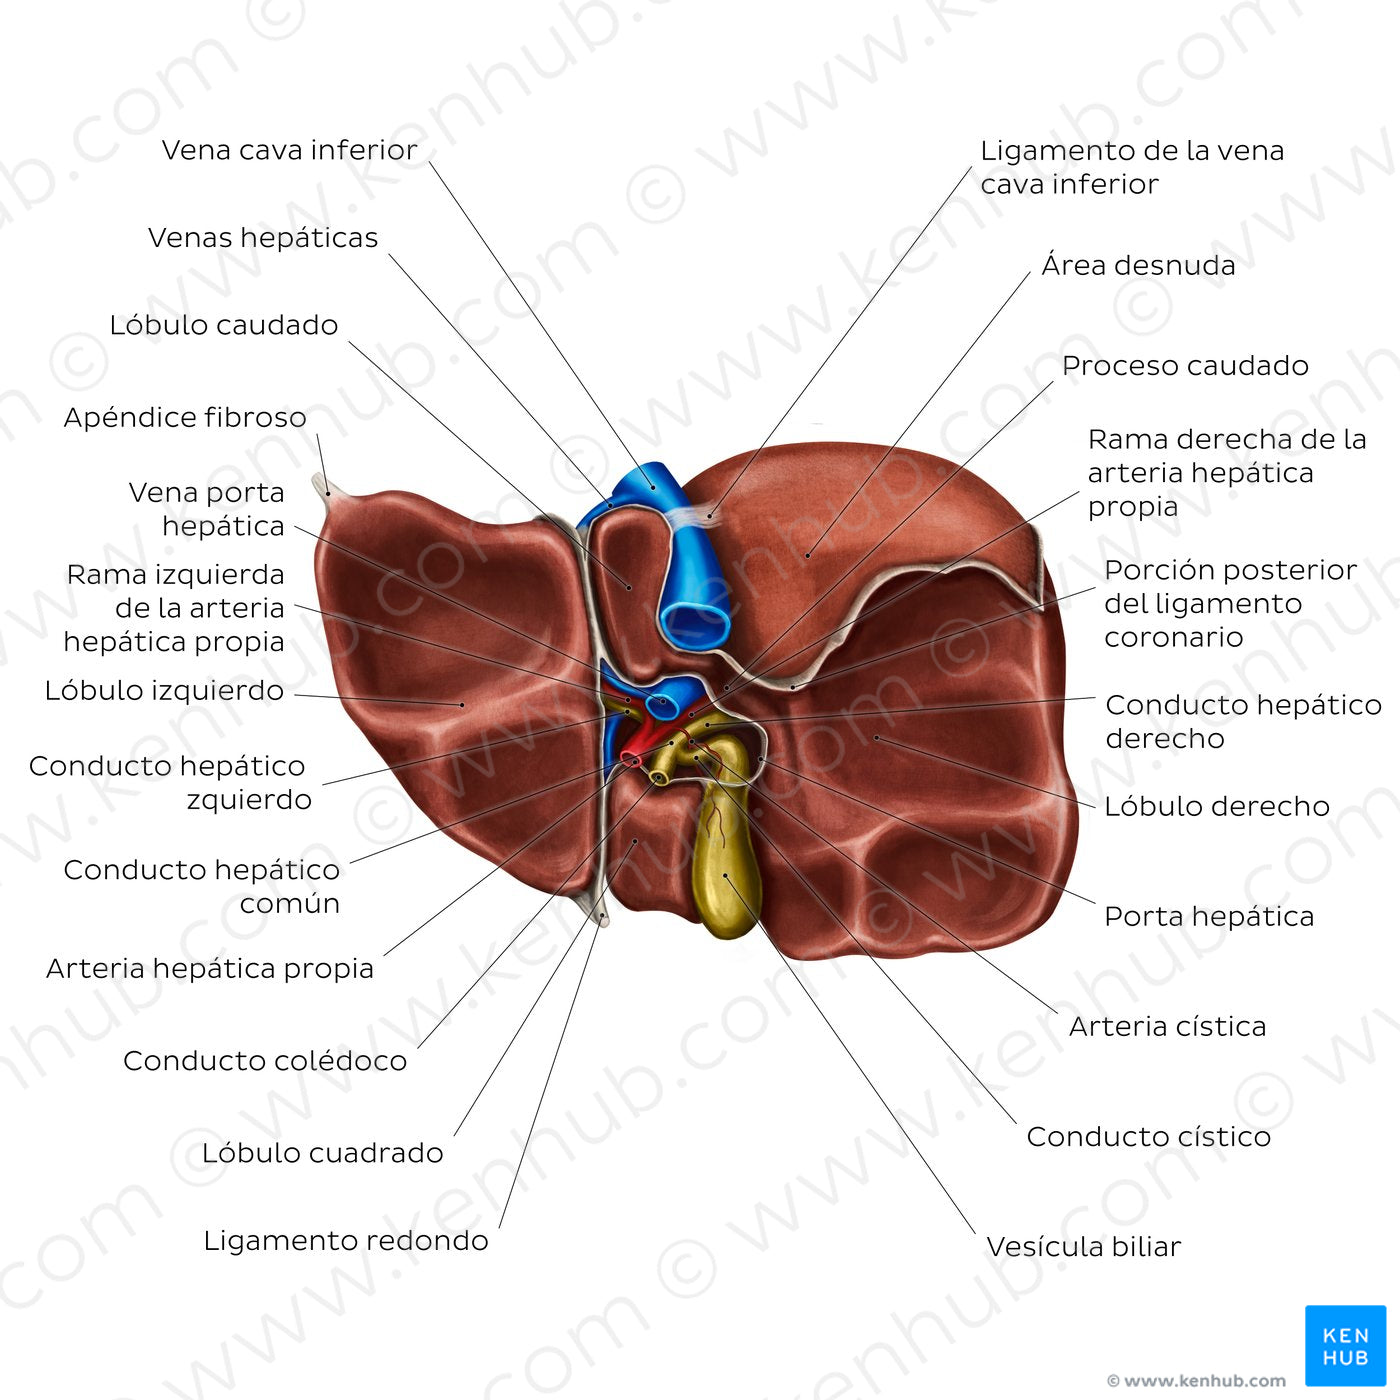 Inferior view of the liver (Spanish)